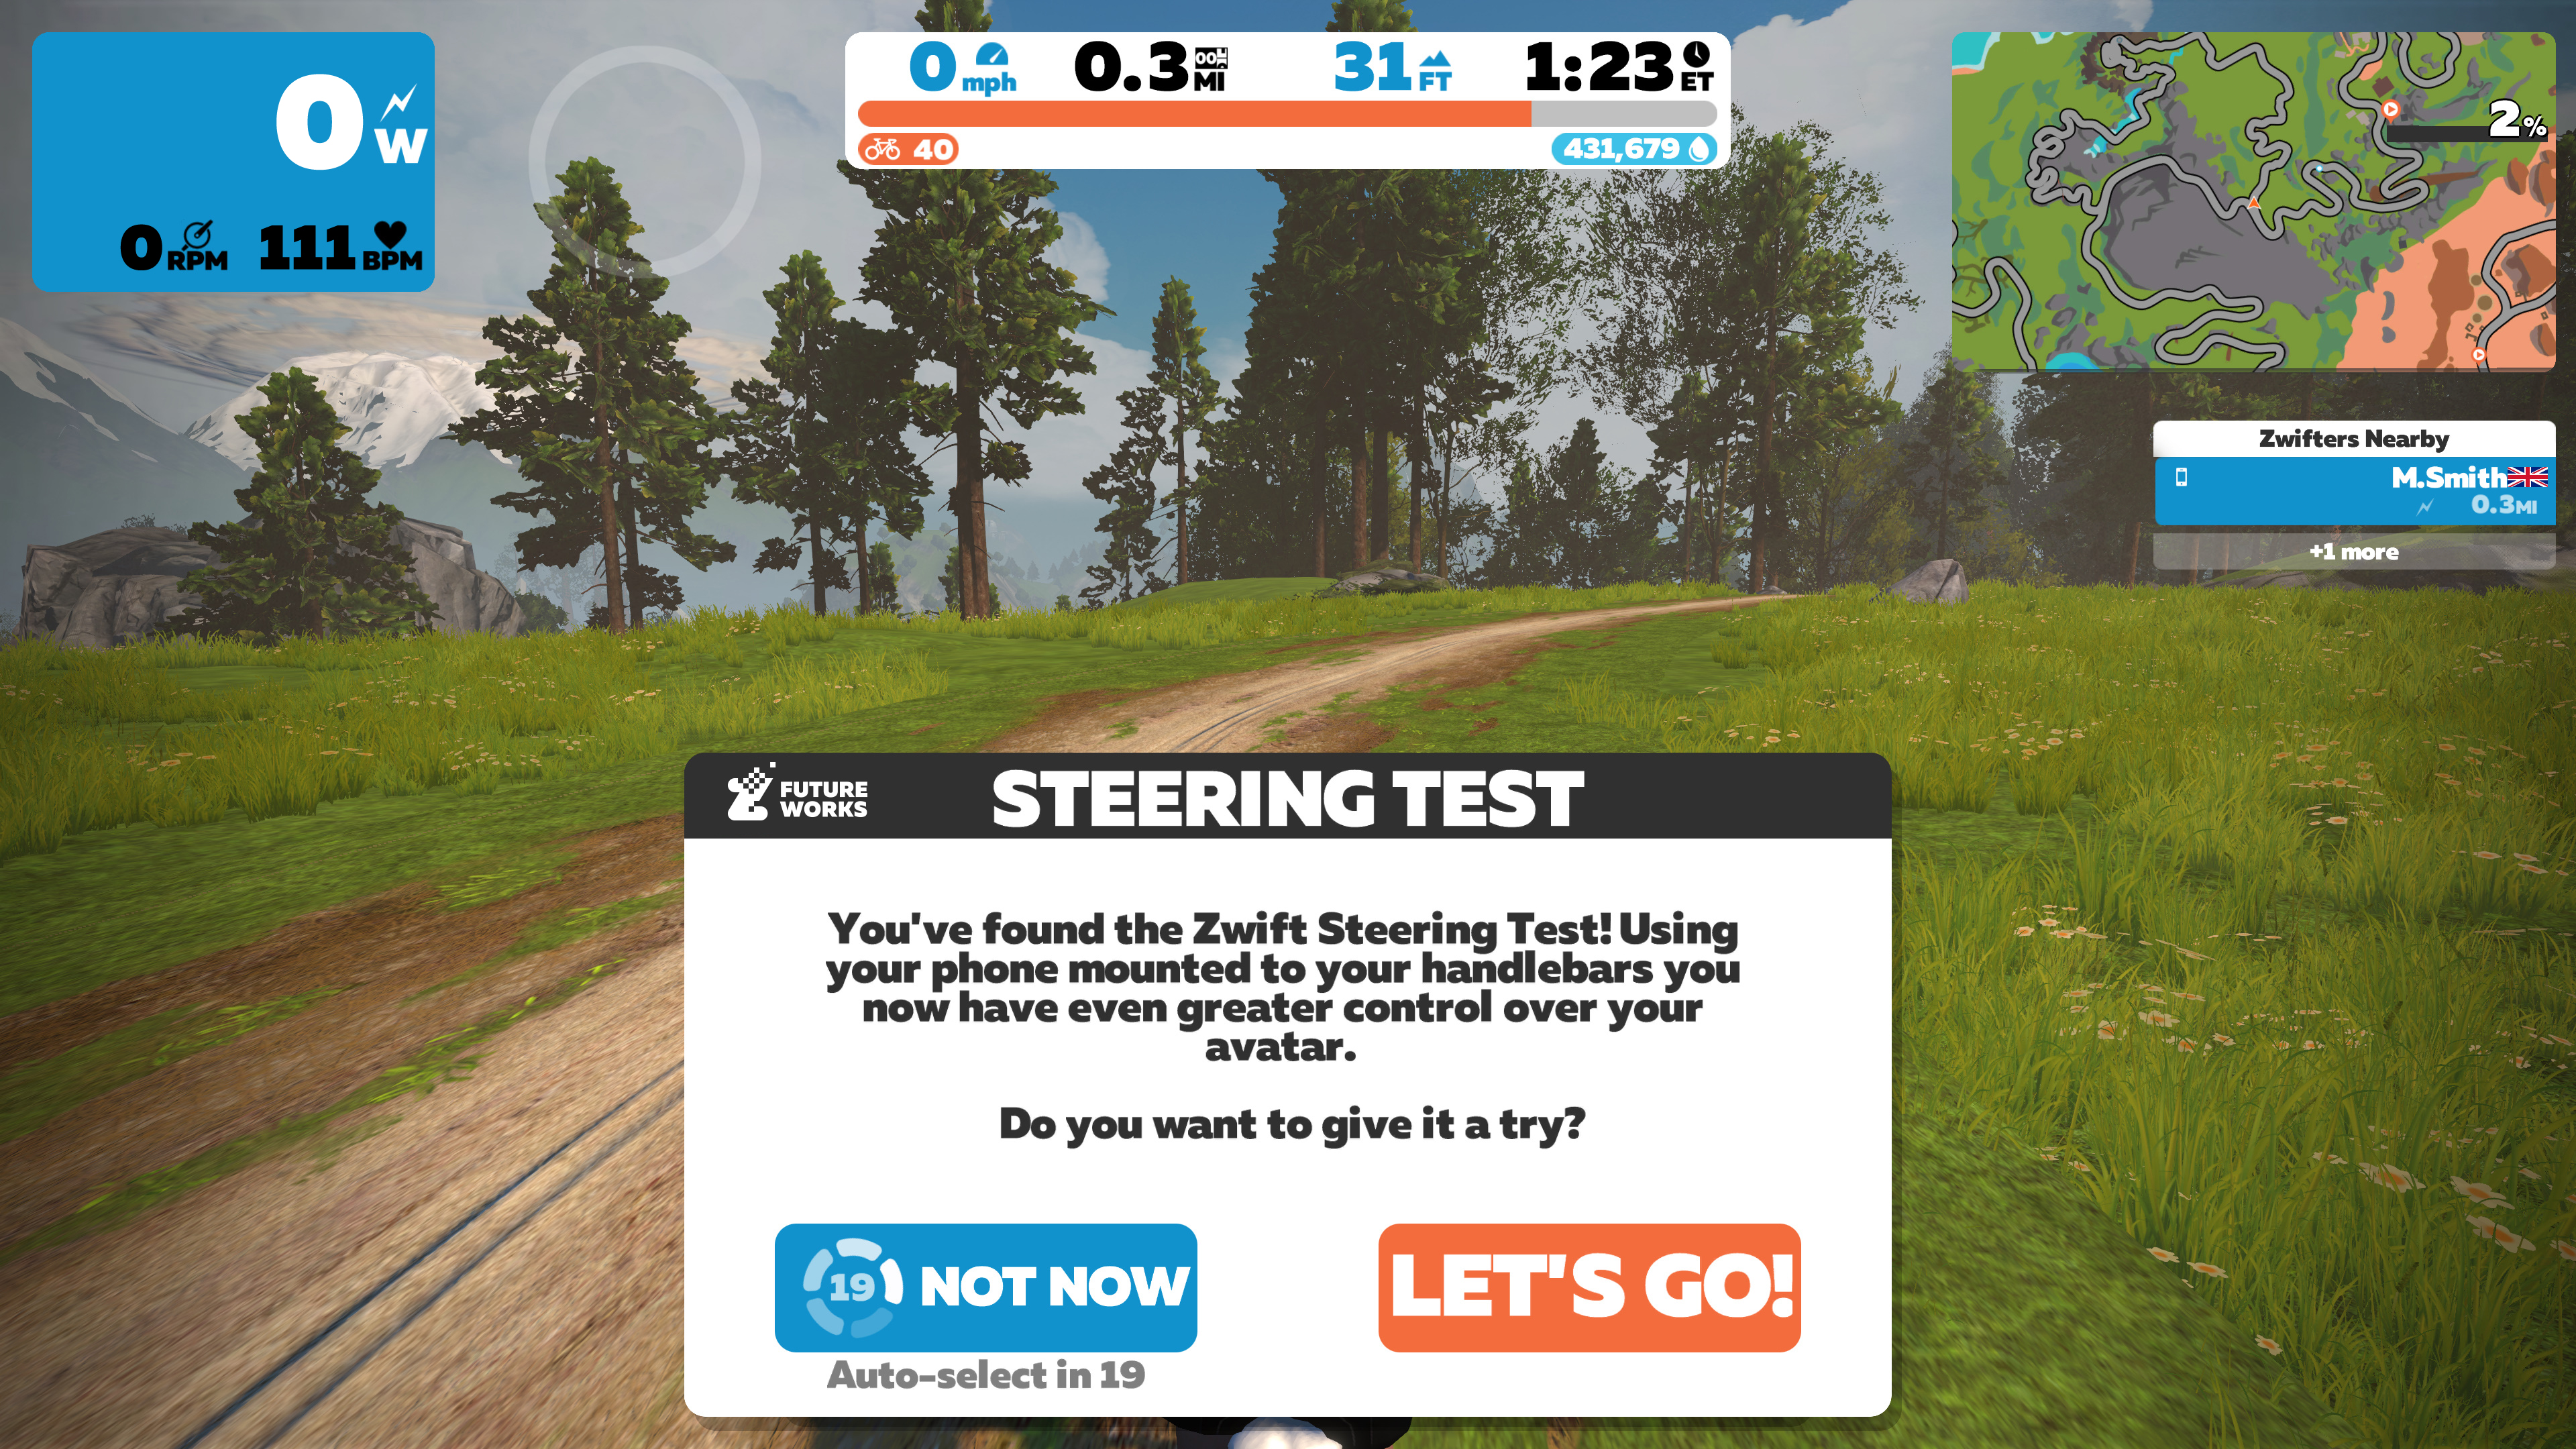 Time to turn on Zwift - FutureWorks In-Game Steering is live for public testing